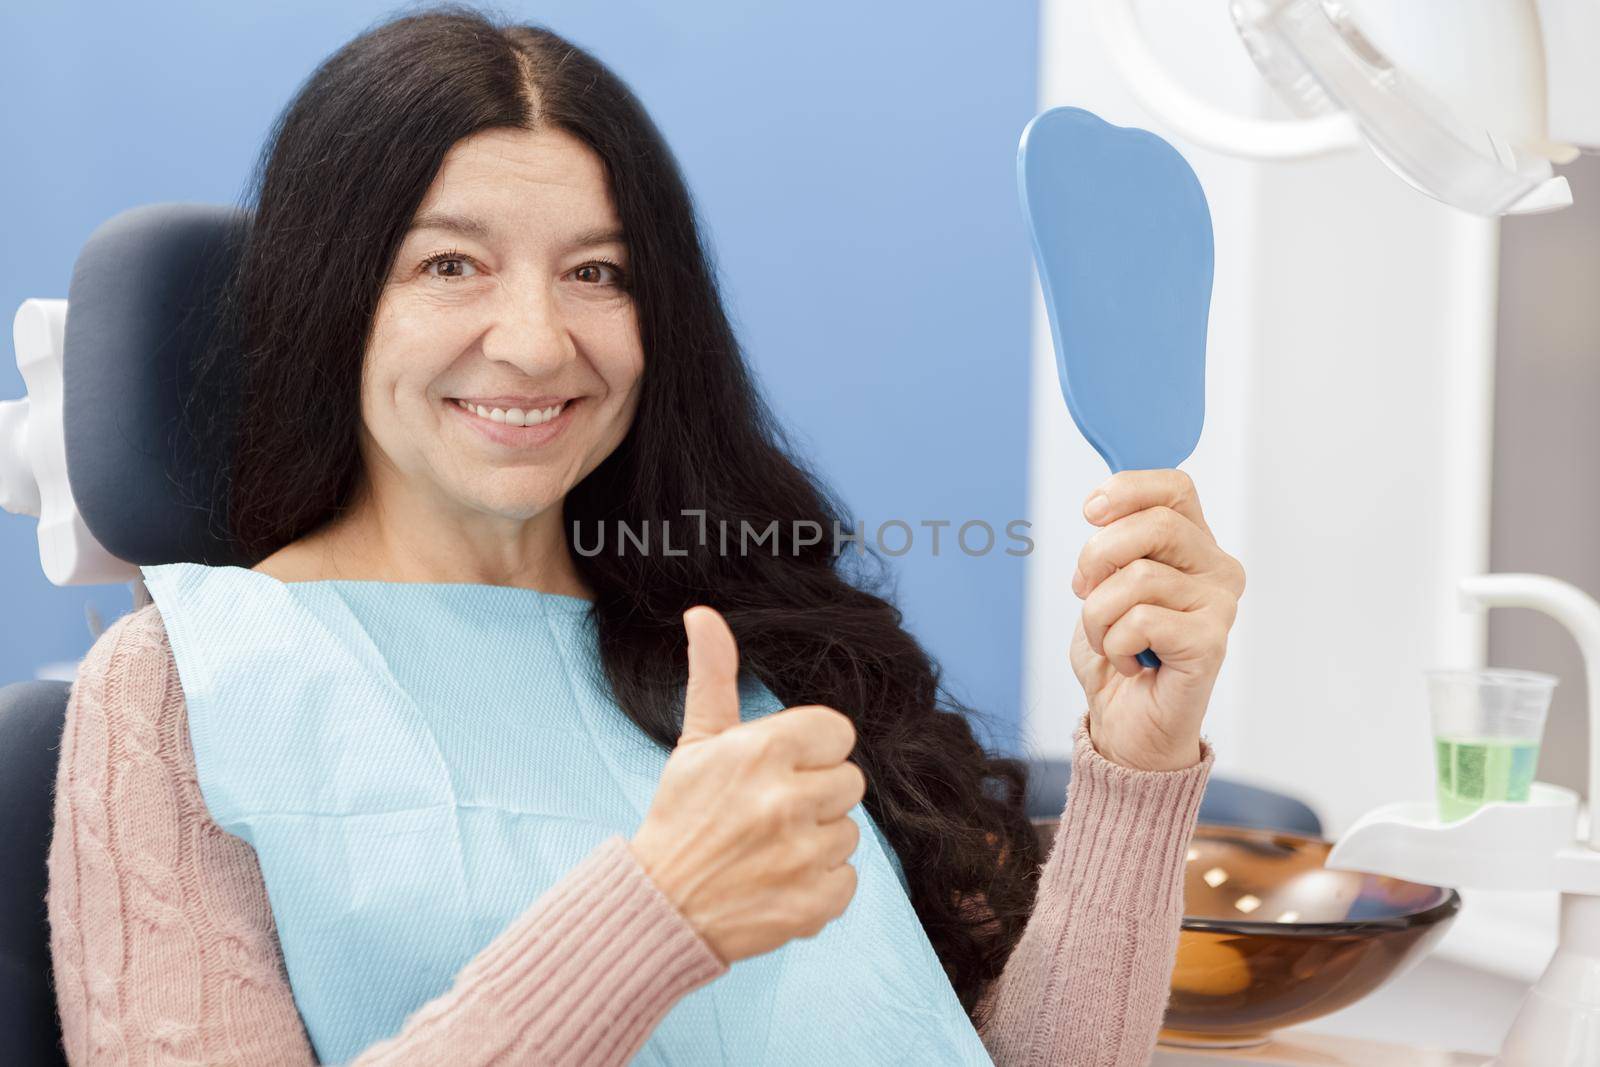 Healthy beautiful smile. Happy senior woman smiling joyfully showing thumbs up holding a mirror at the dental clinic patient client service retirement health medical industry people insurance concept